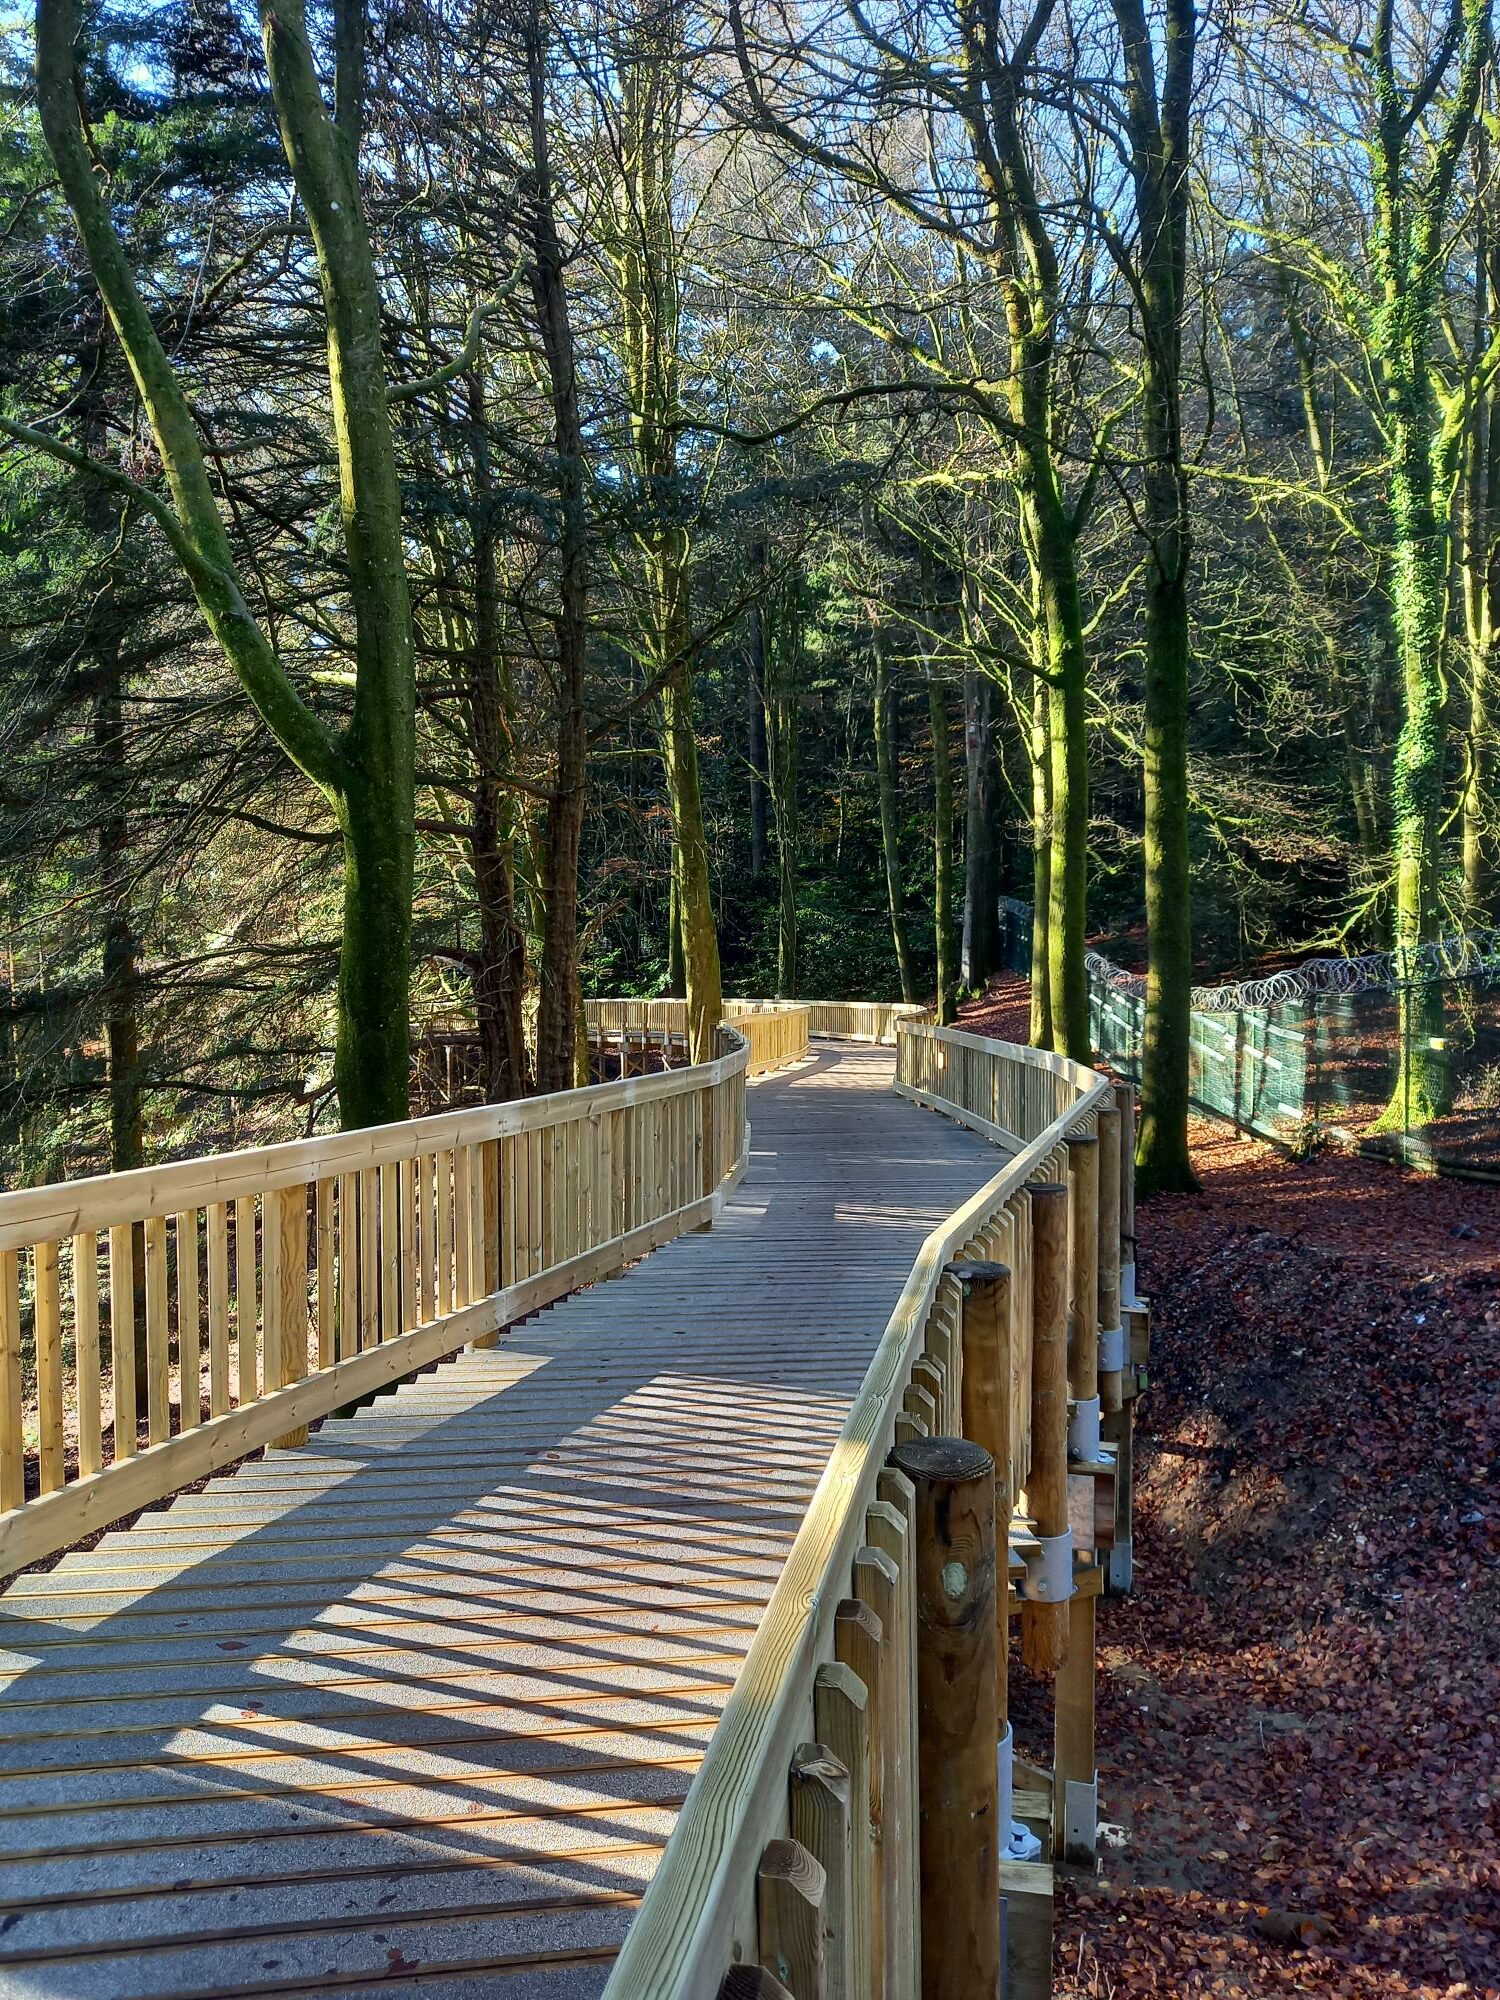 Non-slip timber decking boardwalk at Center Parcs Longleat Forest